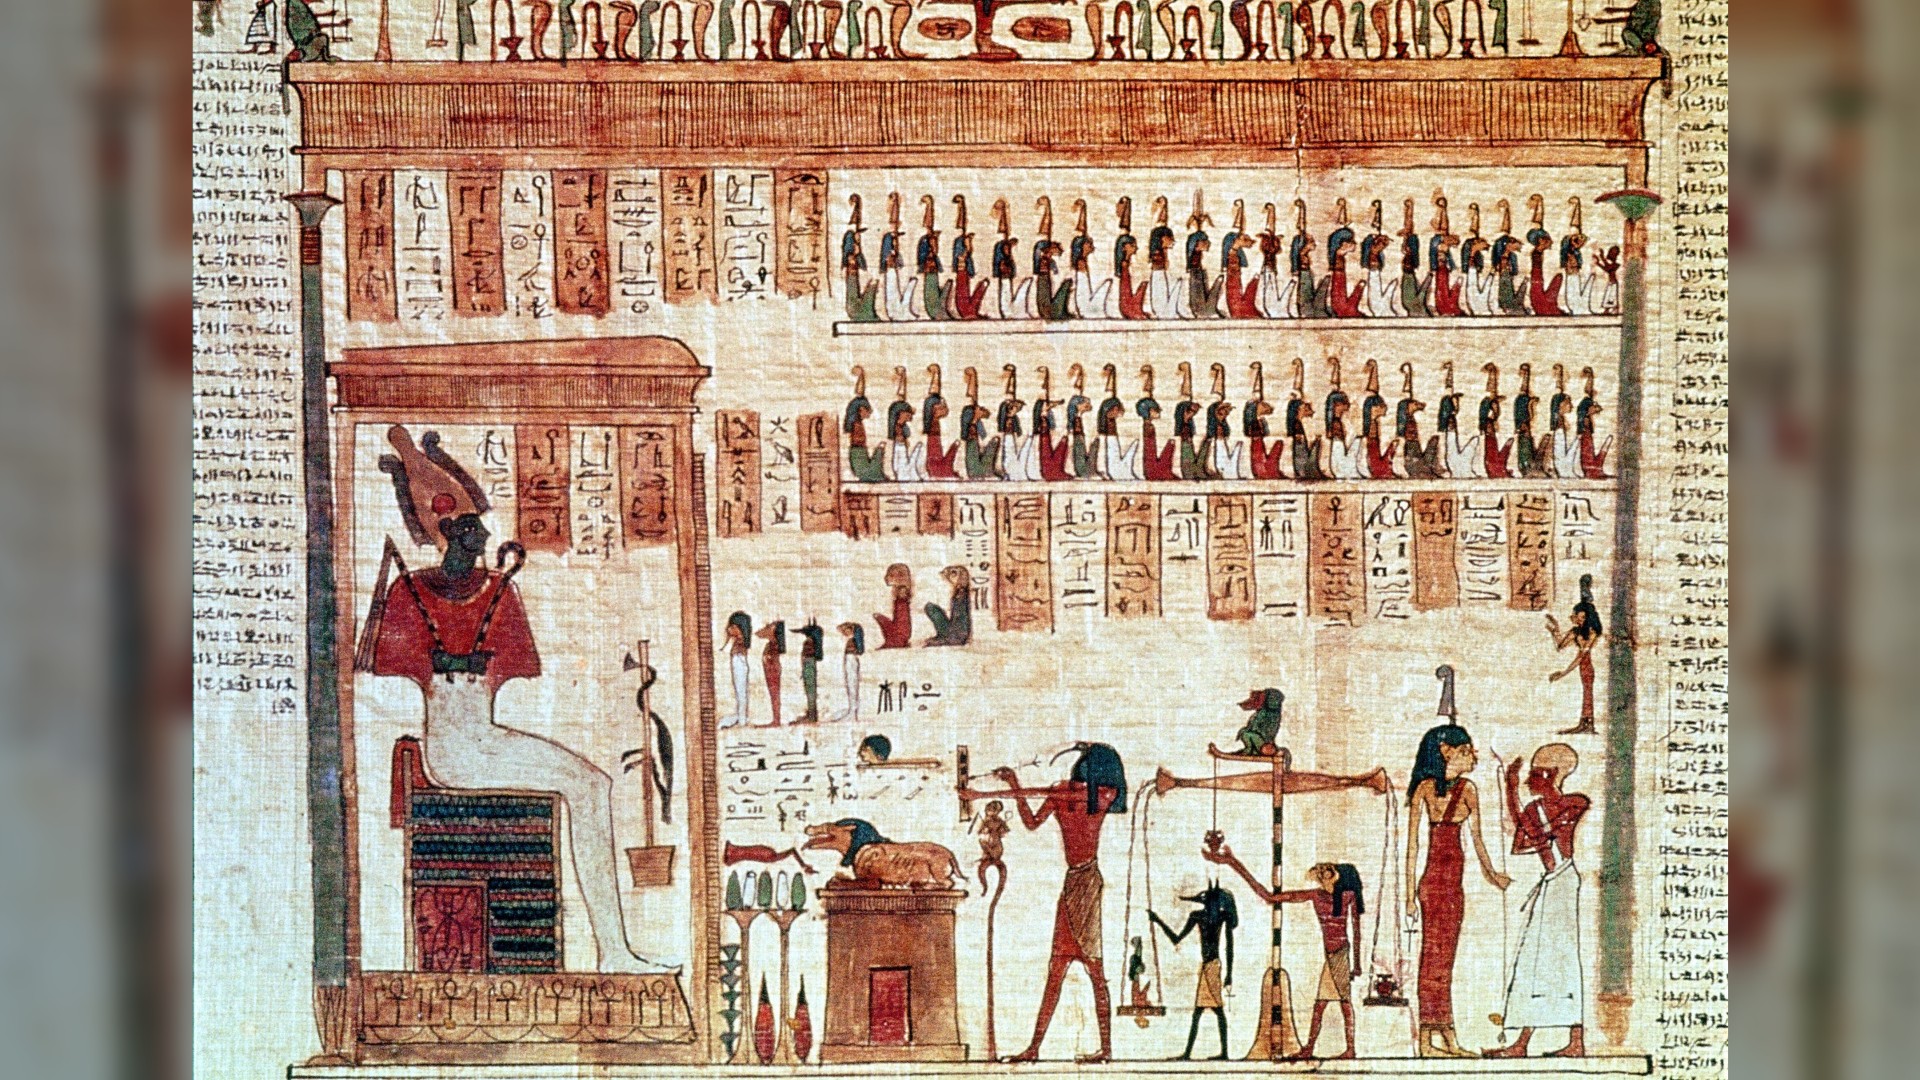 An image from the Book of the Dead. A section of the Book of the Dead. Here we see judgment of the dead, with the weighing of the heart ritual.